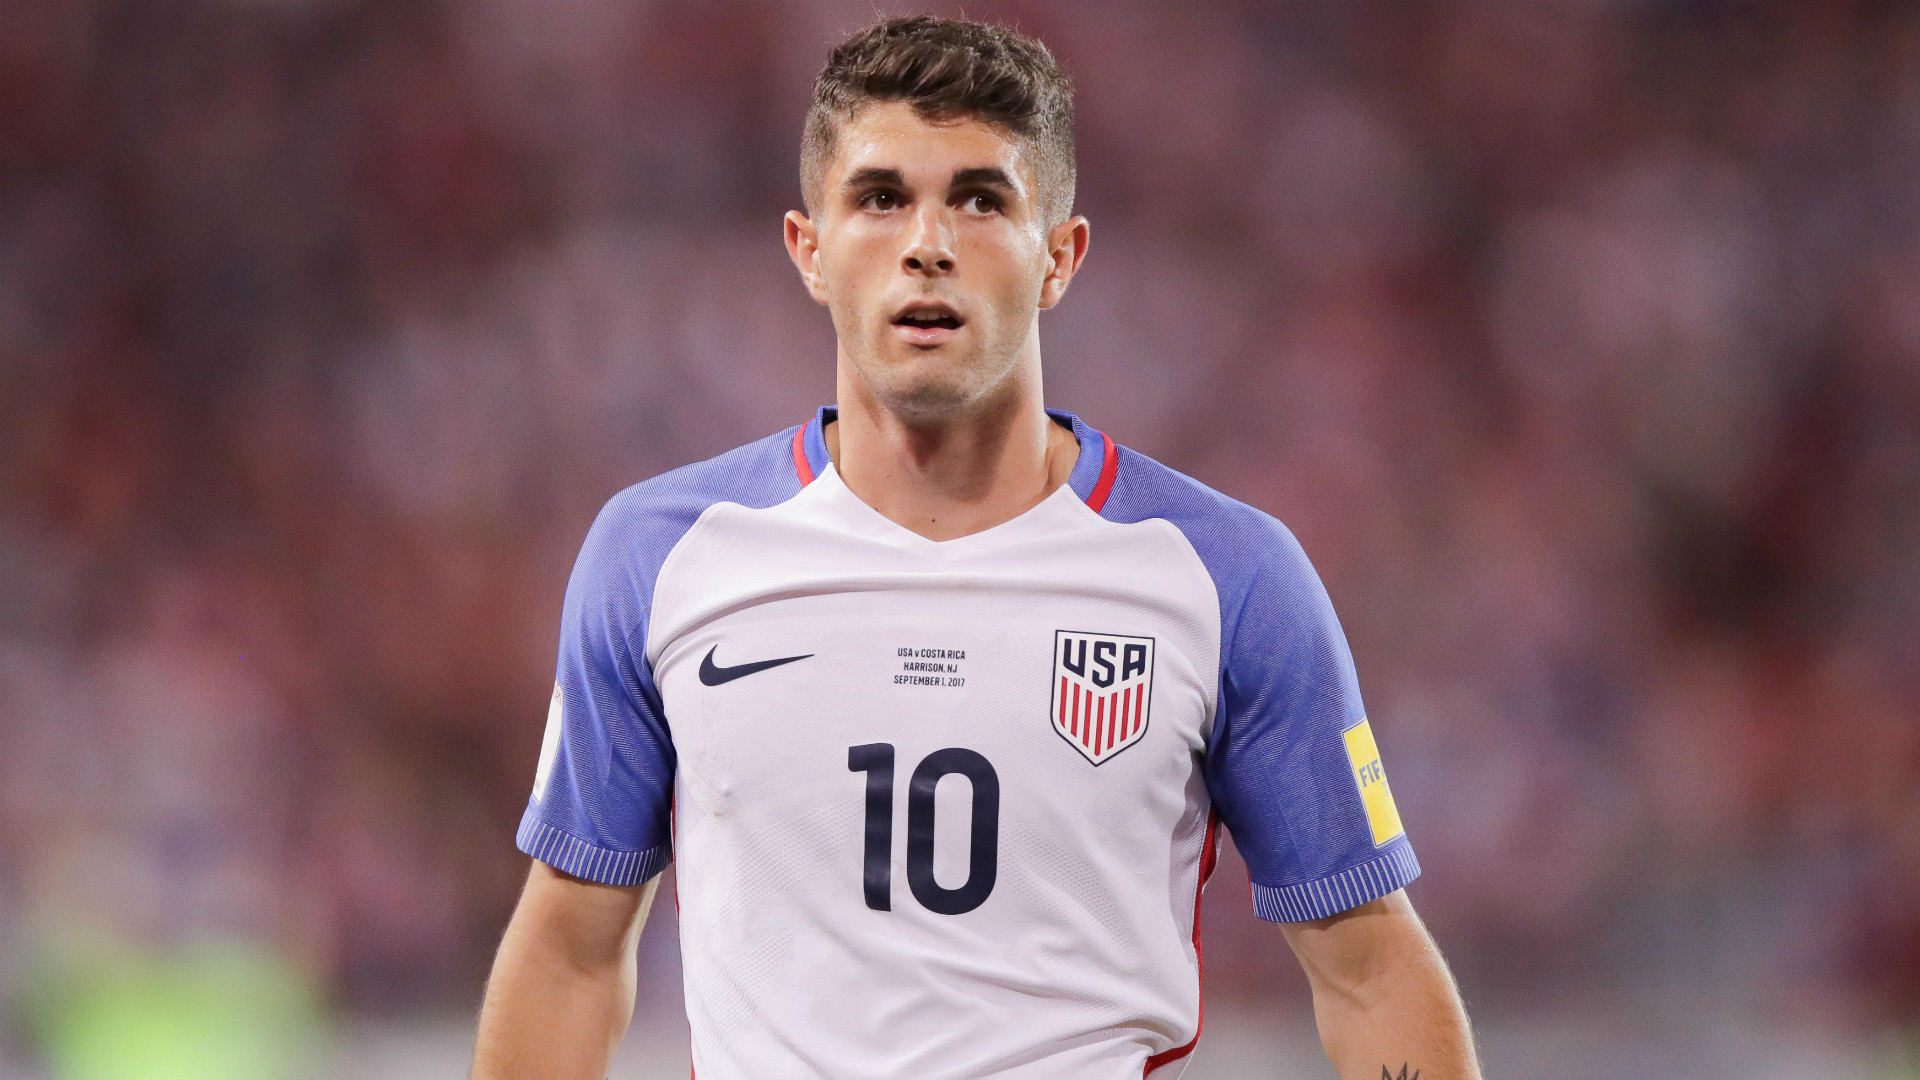 USMNT World Cup: Projecting U.S. Soccer's 2022 World Cup squad